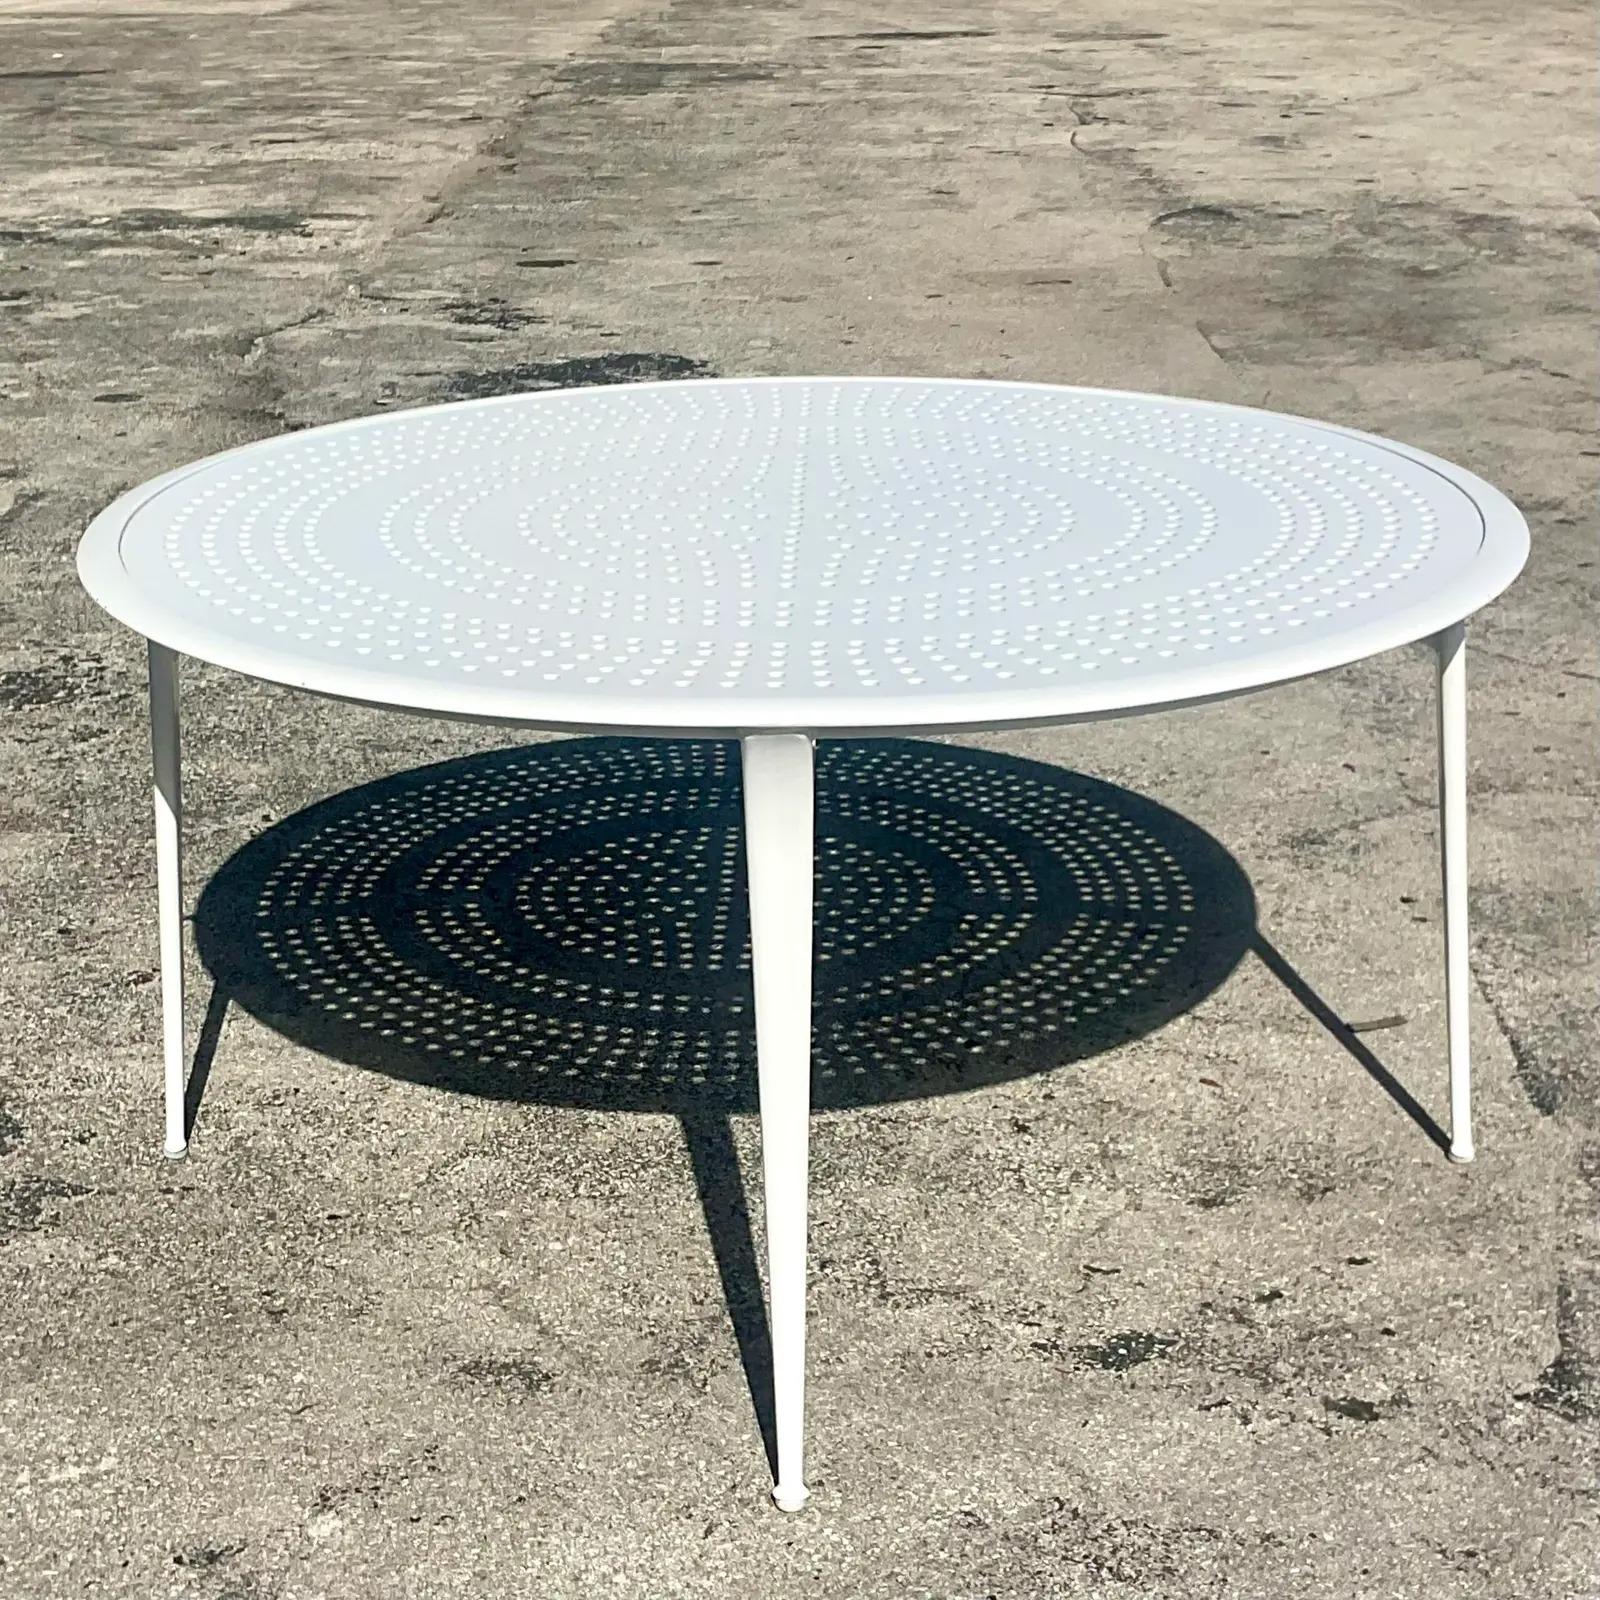 A fantastic vintage coastal dining table. A chic punch cut aluminum in a round shape. Tagged.